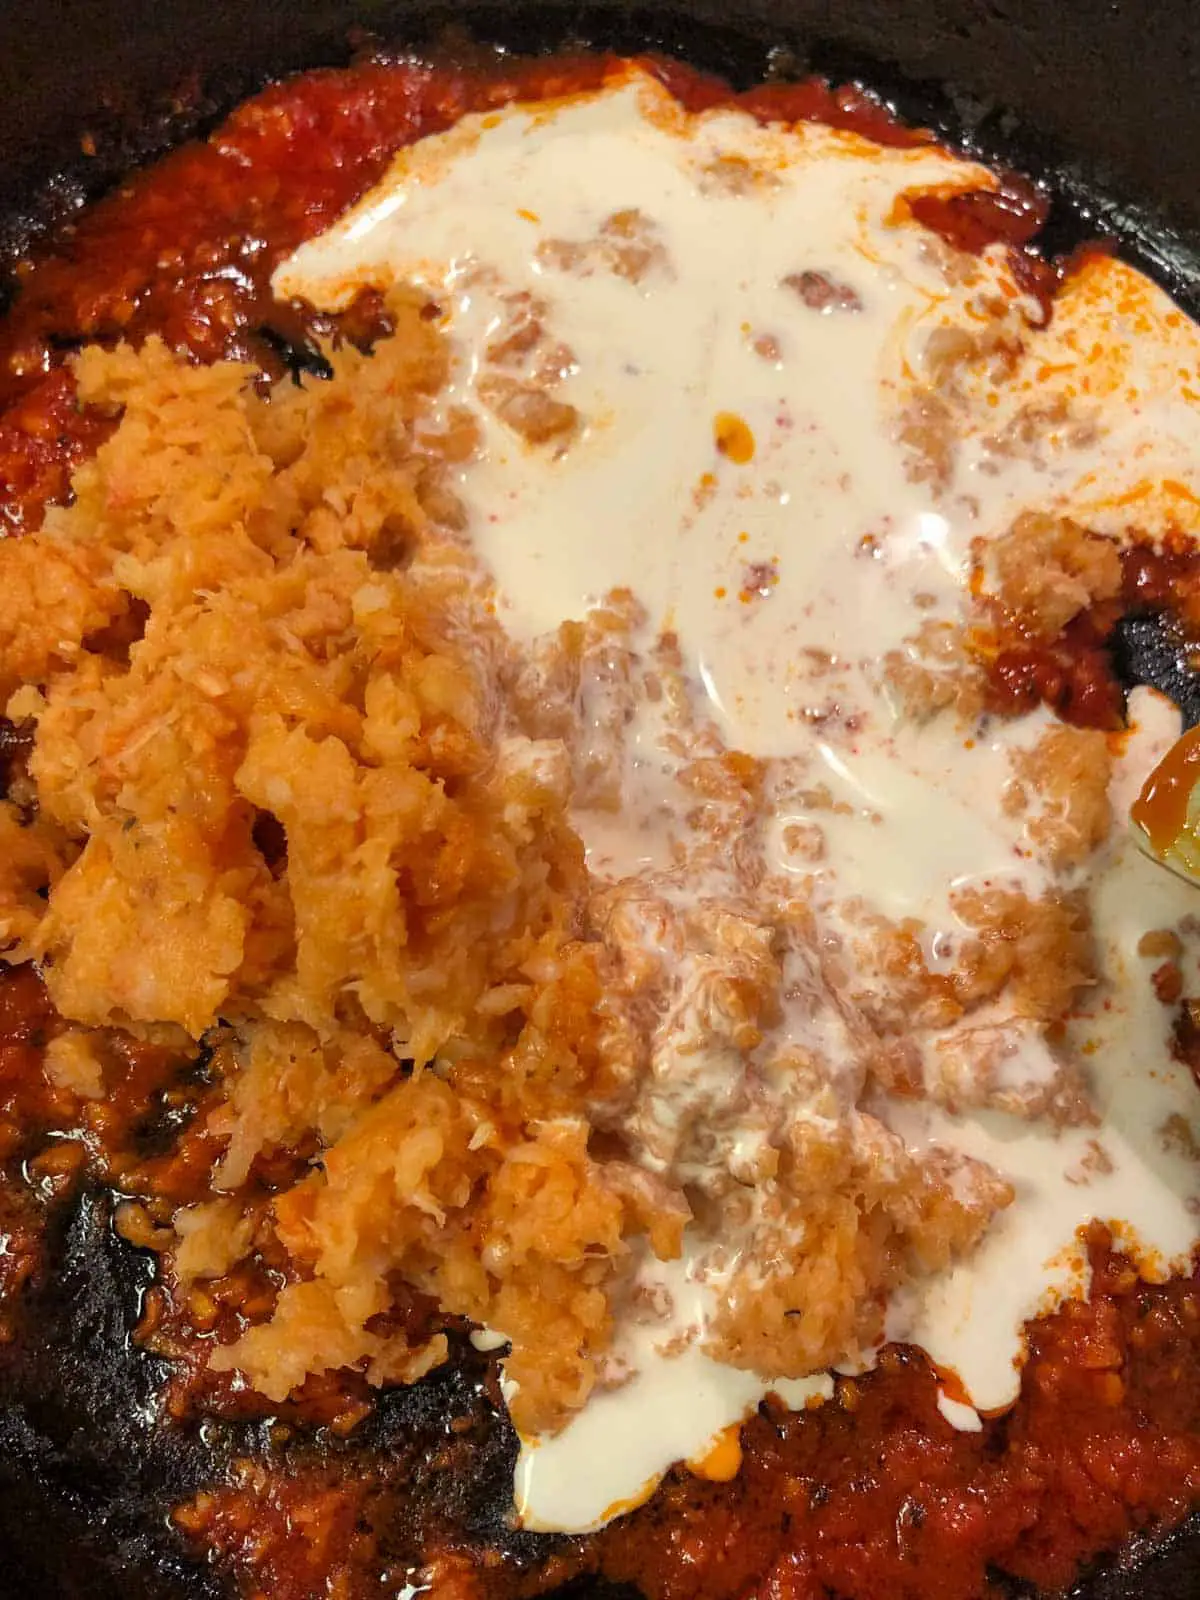 Tomato paste with minced shrimp and cream in a cast iron skillet.